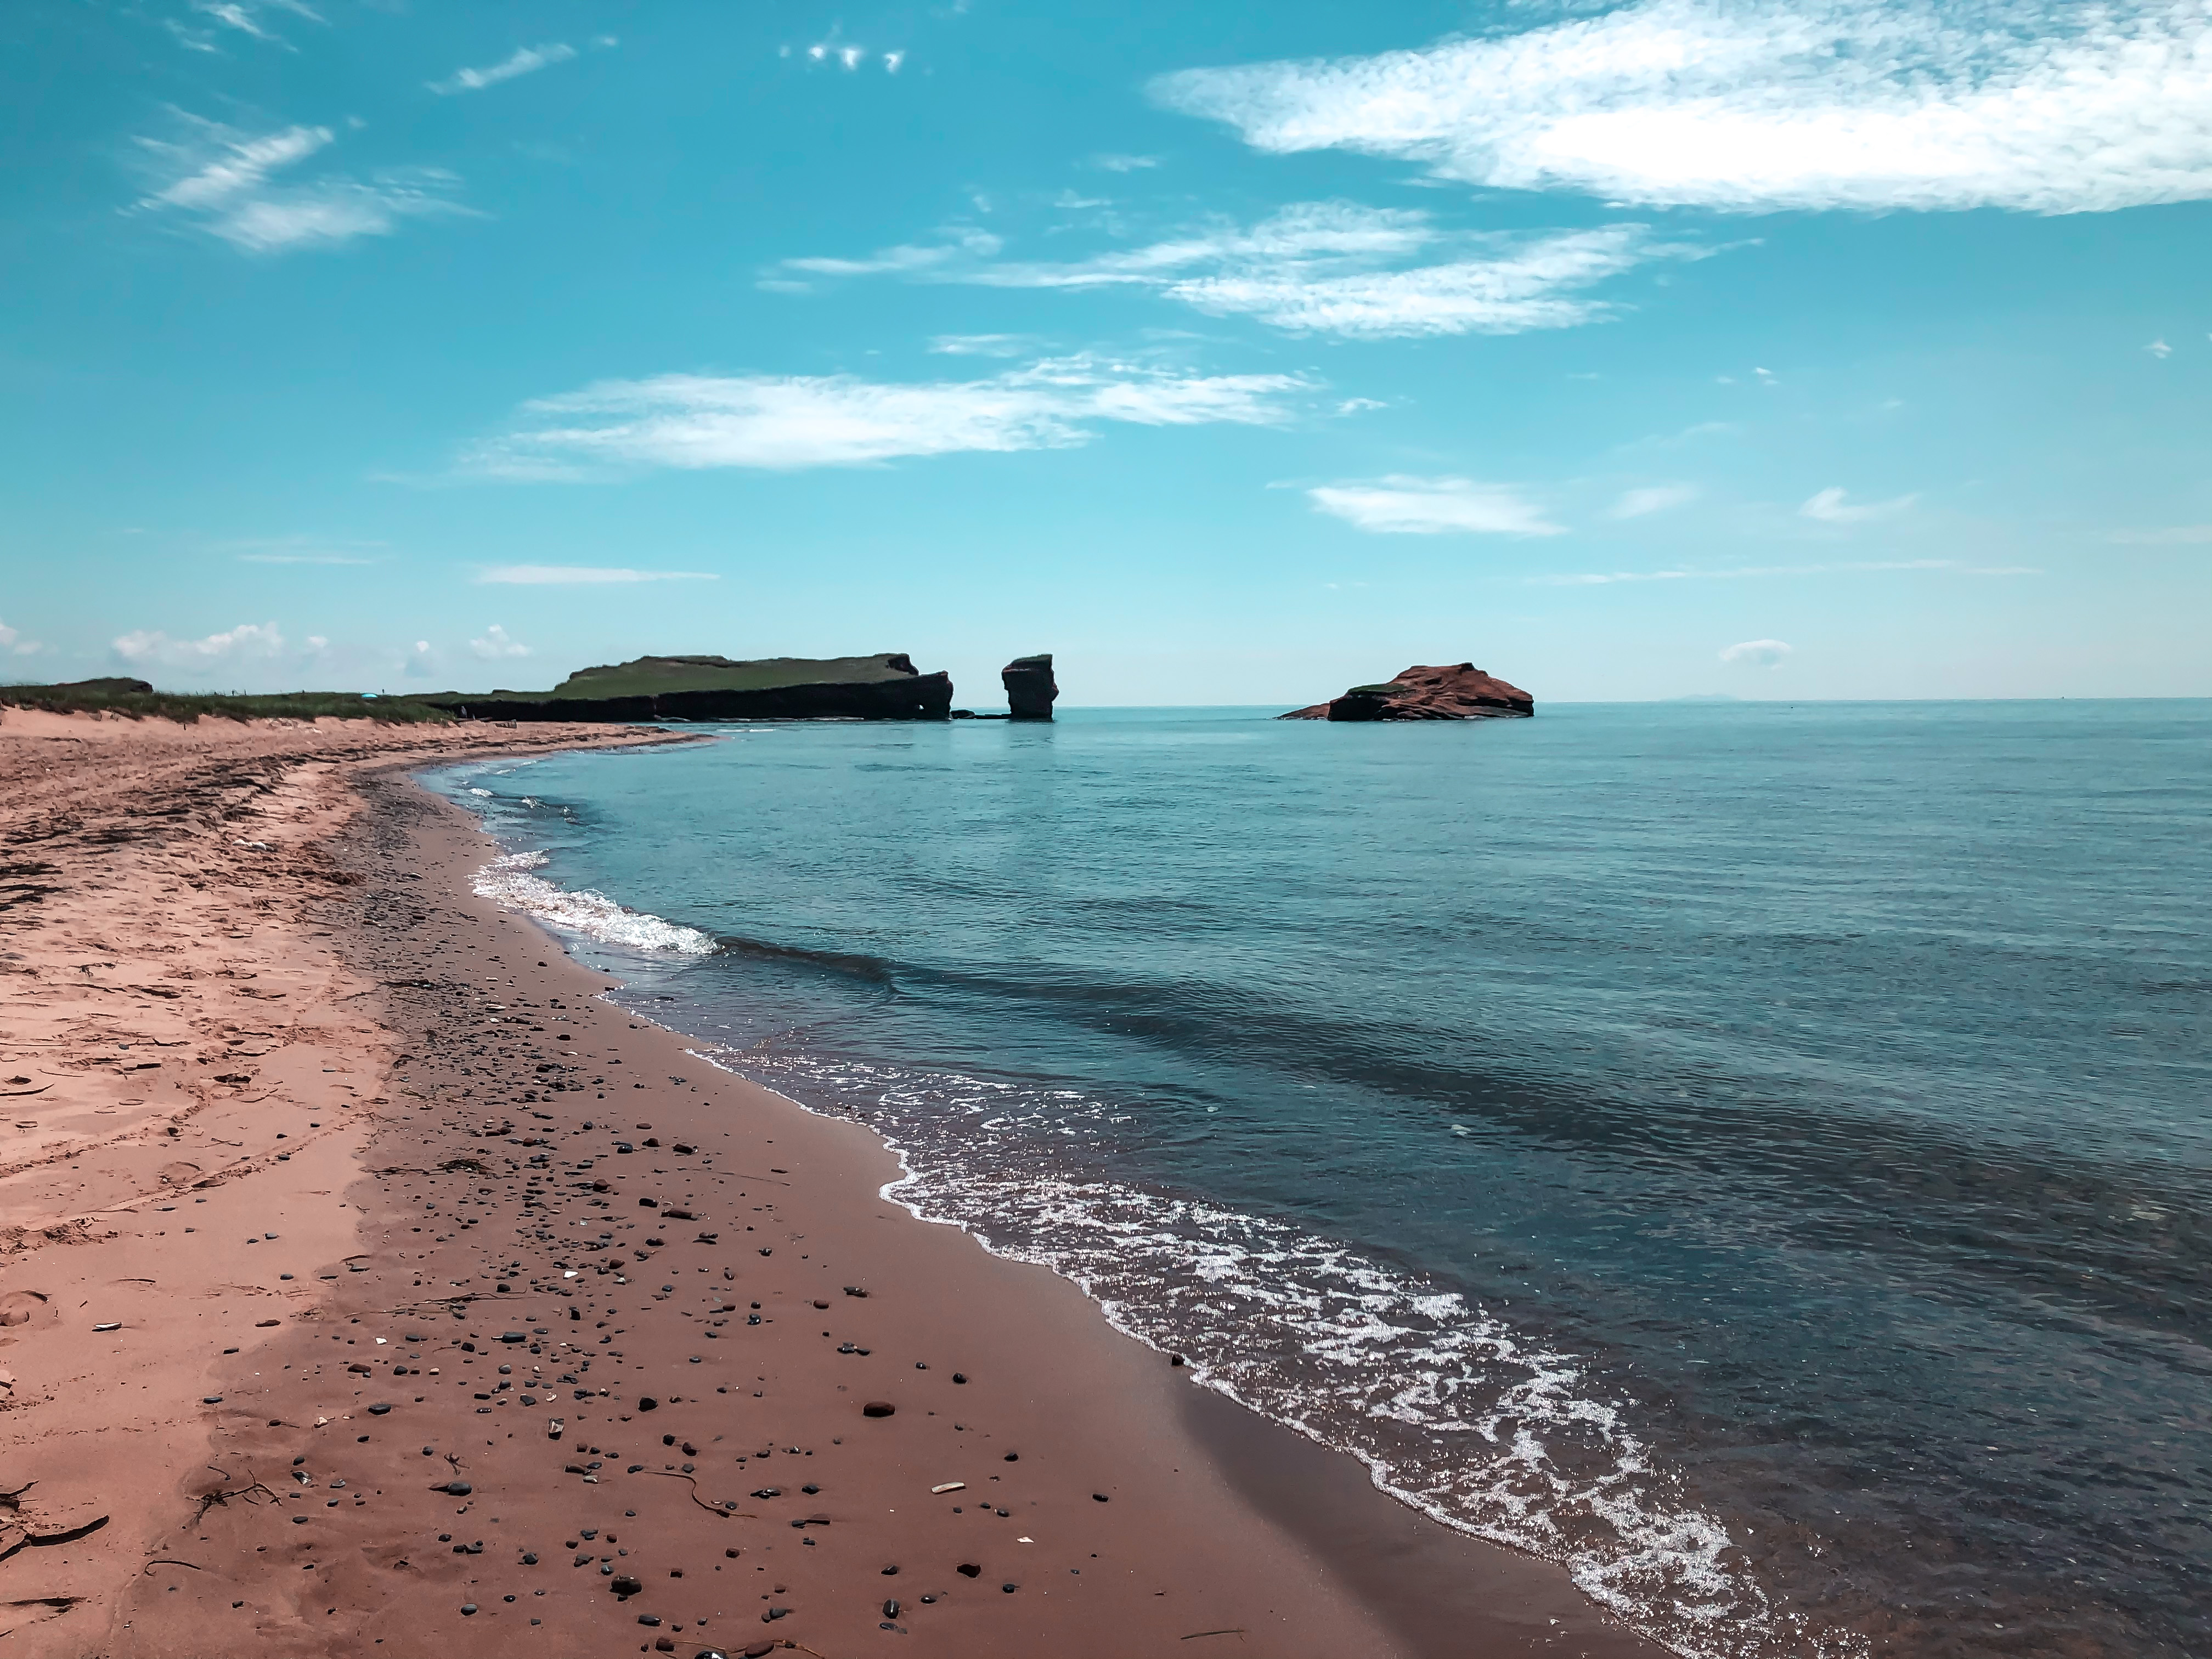 20 photos to inspire you to visit the Magdalen Islands